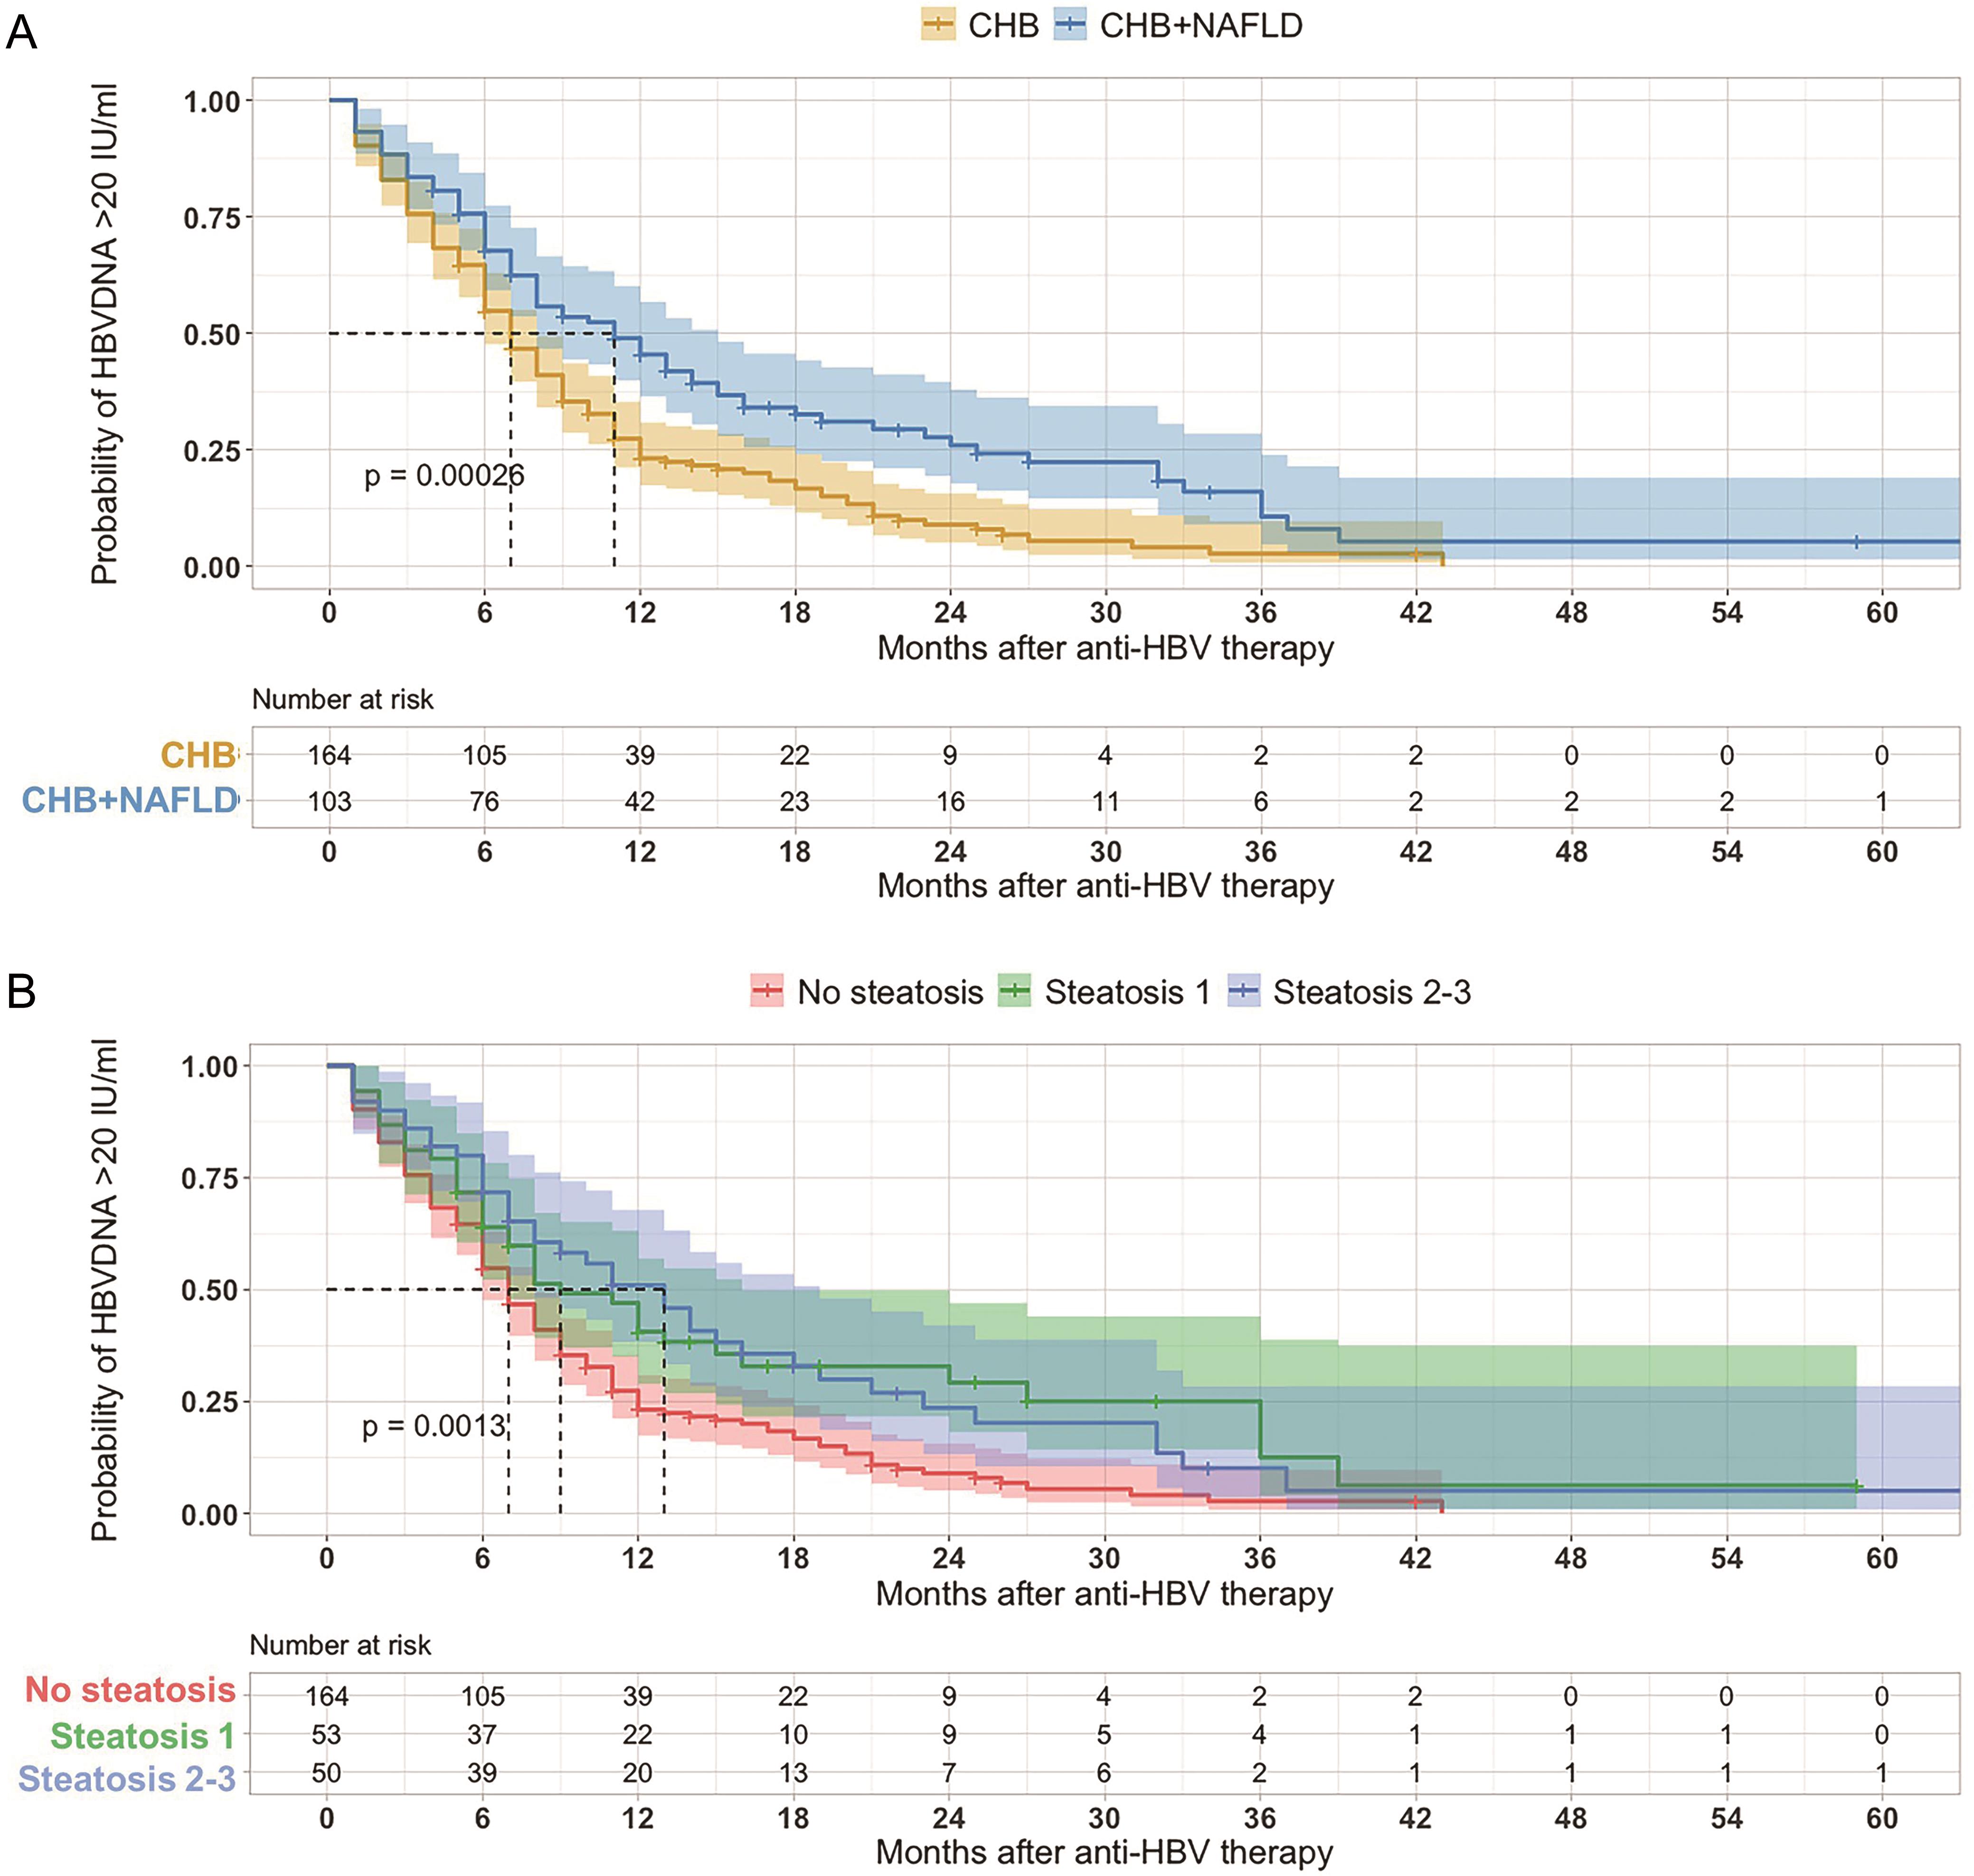 Kaplan-Meier survival curves of percent complete virological response (CVR) in HBV-infected patients disaggregated by the concurrence and grade of hepatic steatosis.